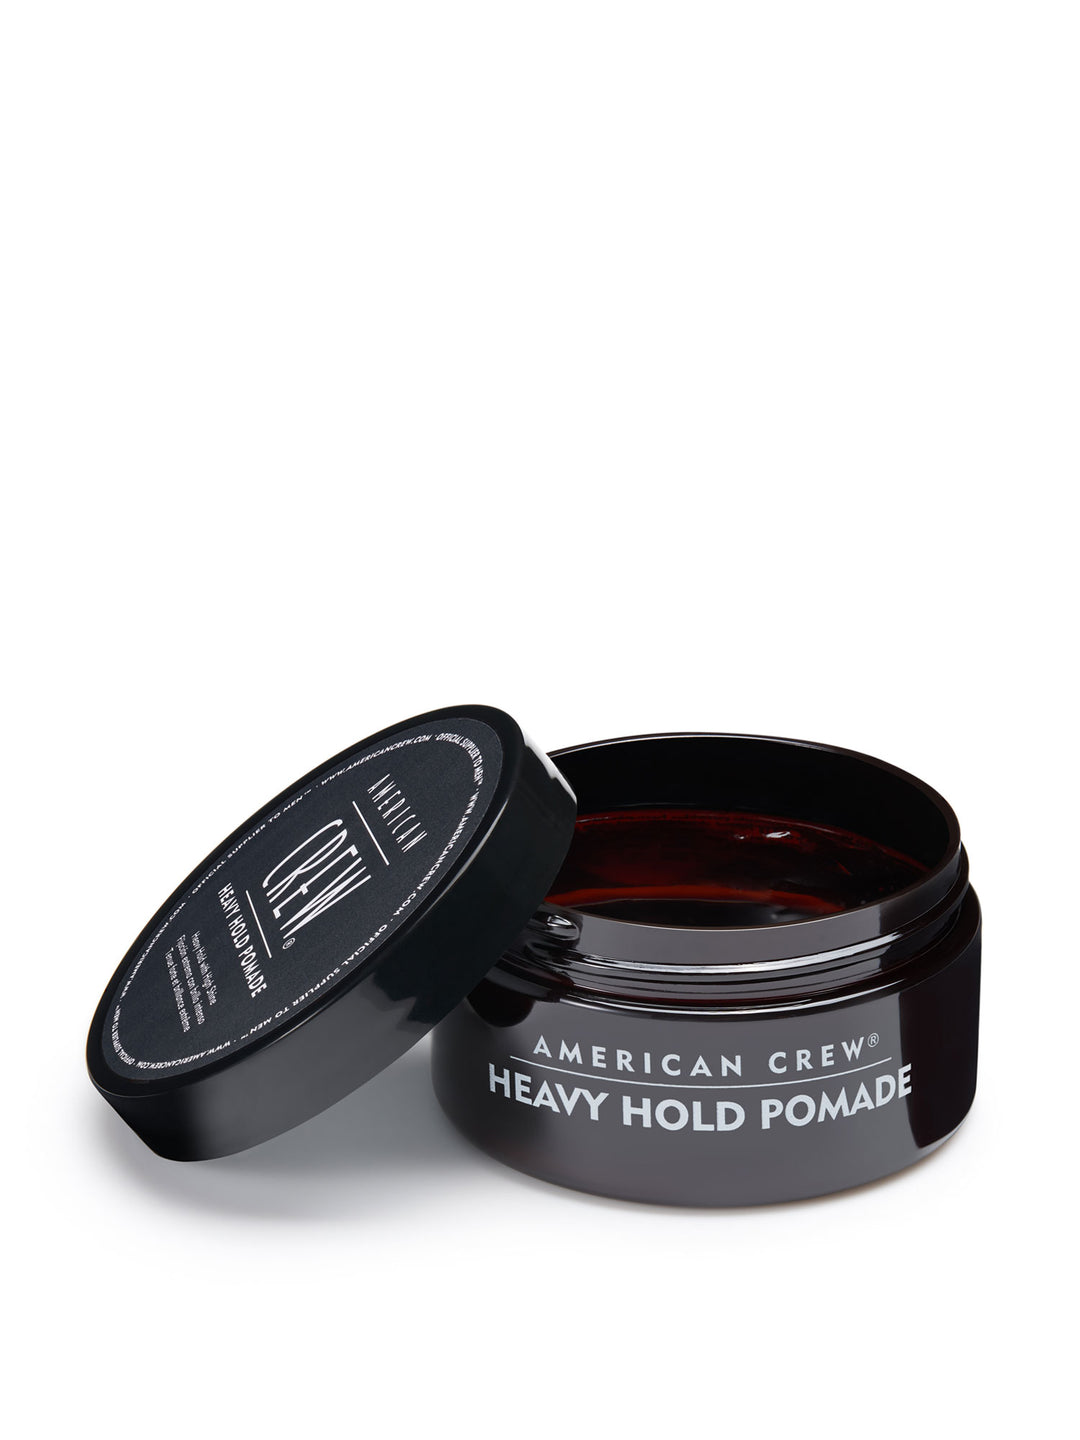 Gel, Styling Hair - Pomade, American Cream, Crew Hair and Products